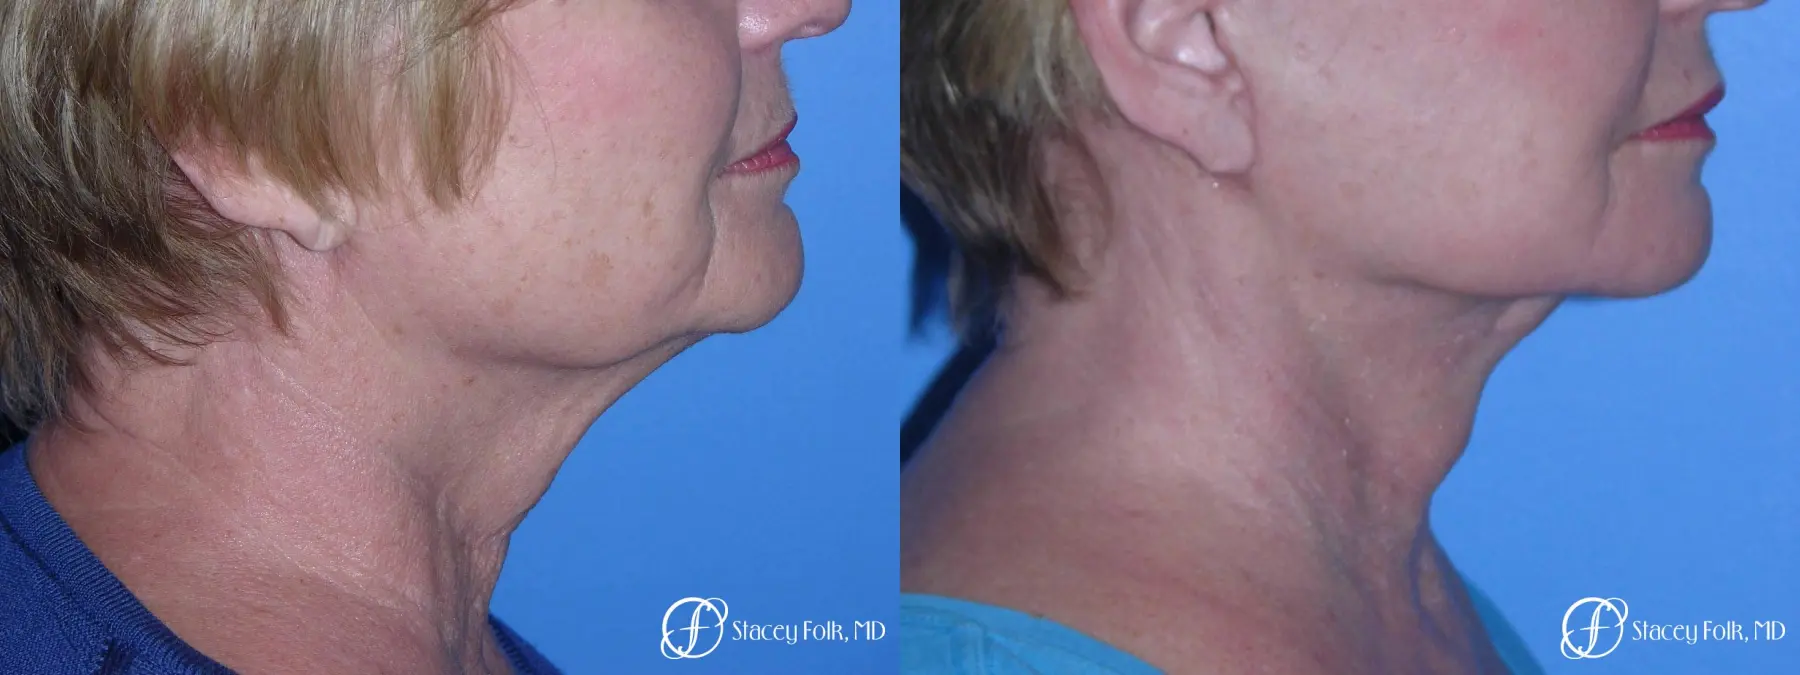 Denver Facial Rejuvenation Face Lift, Fat Injections, and Laser Resurfacing 7120 - Before and After 1